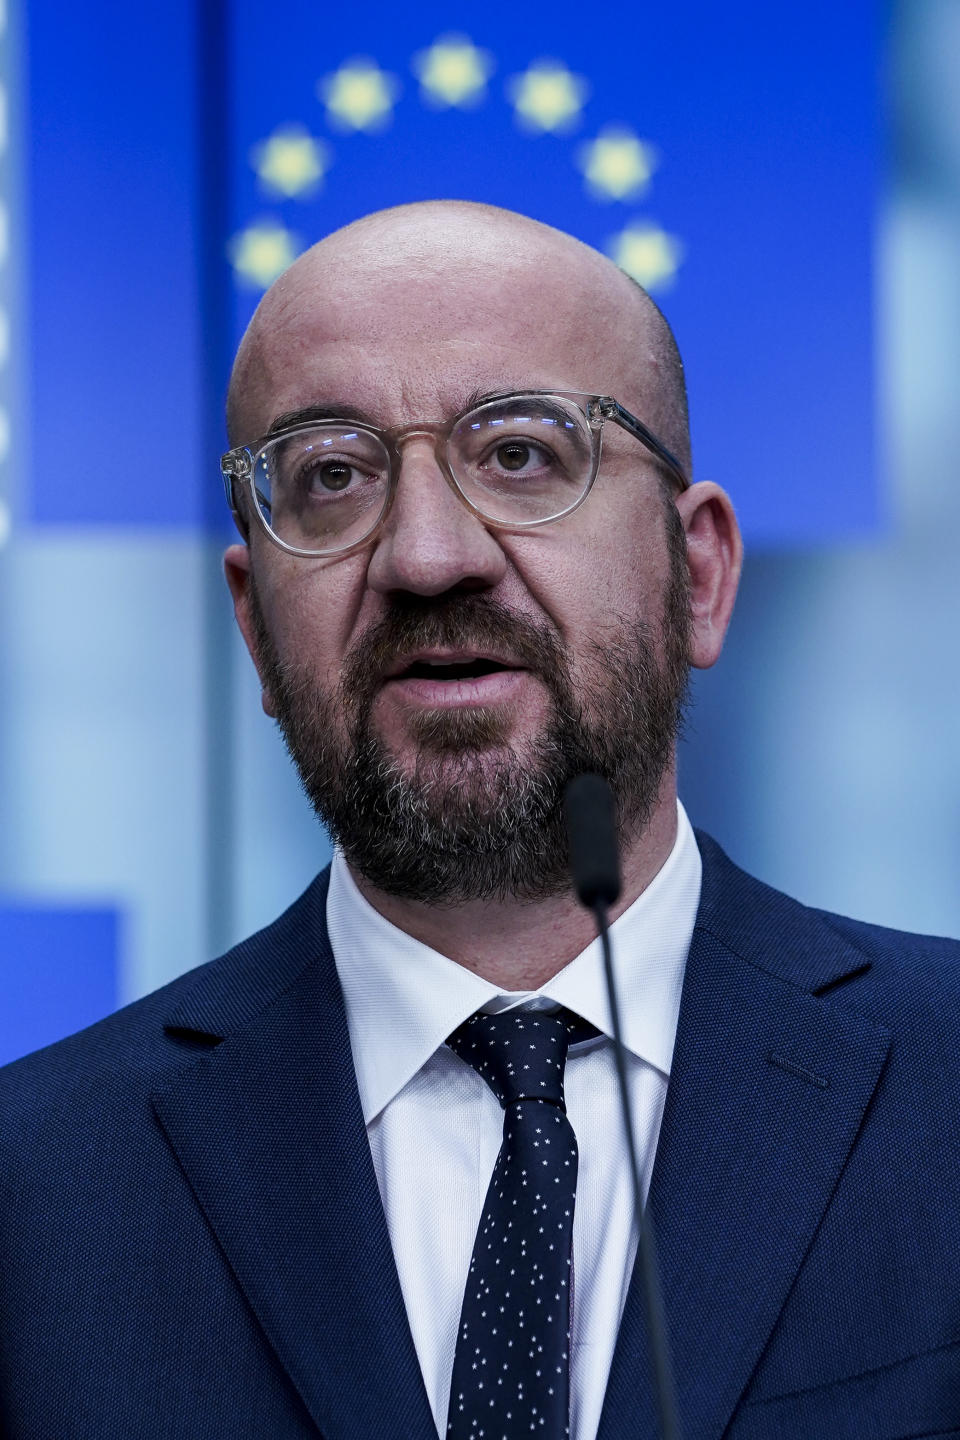 European Council President Charles Michel speaks during a media conference at the European Council building in Brussels, Friday, July 10, 2020. European Council President Charles Michel presented updated proposals for the EU's long-term budget and post-coronavirus recovery plan ahead of a summit next week in Brussels where heads of state and government leaders will try to agree on a compromise. (Kenzo Tribouillard, Pool Photo via AP)